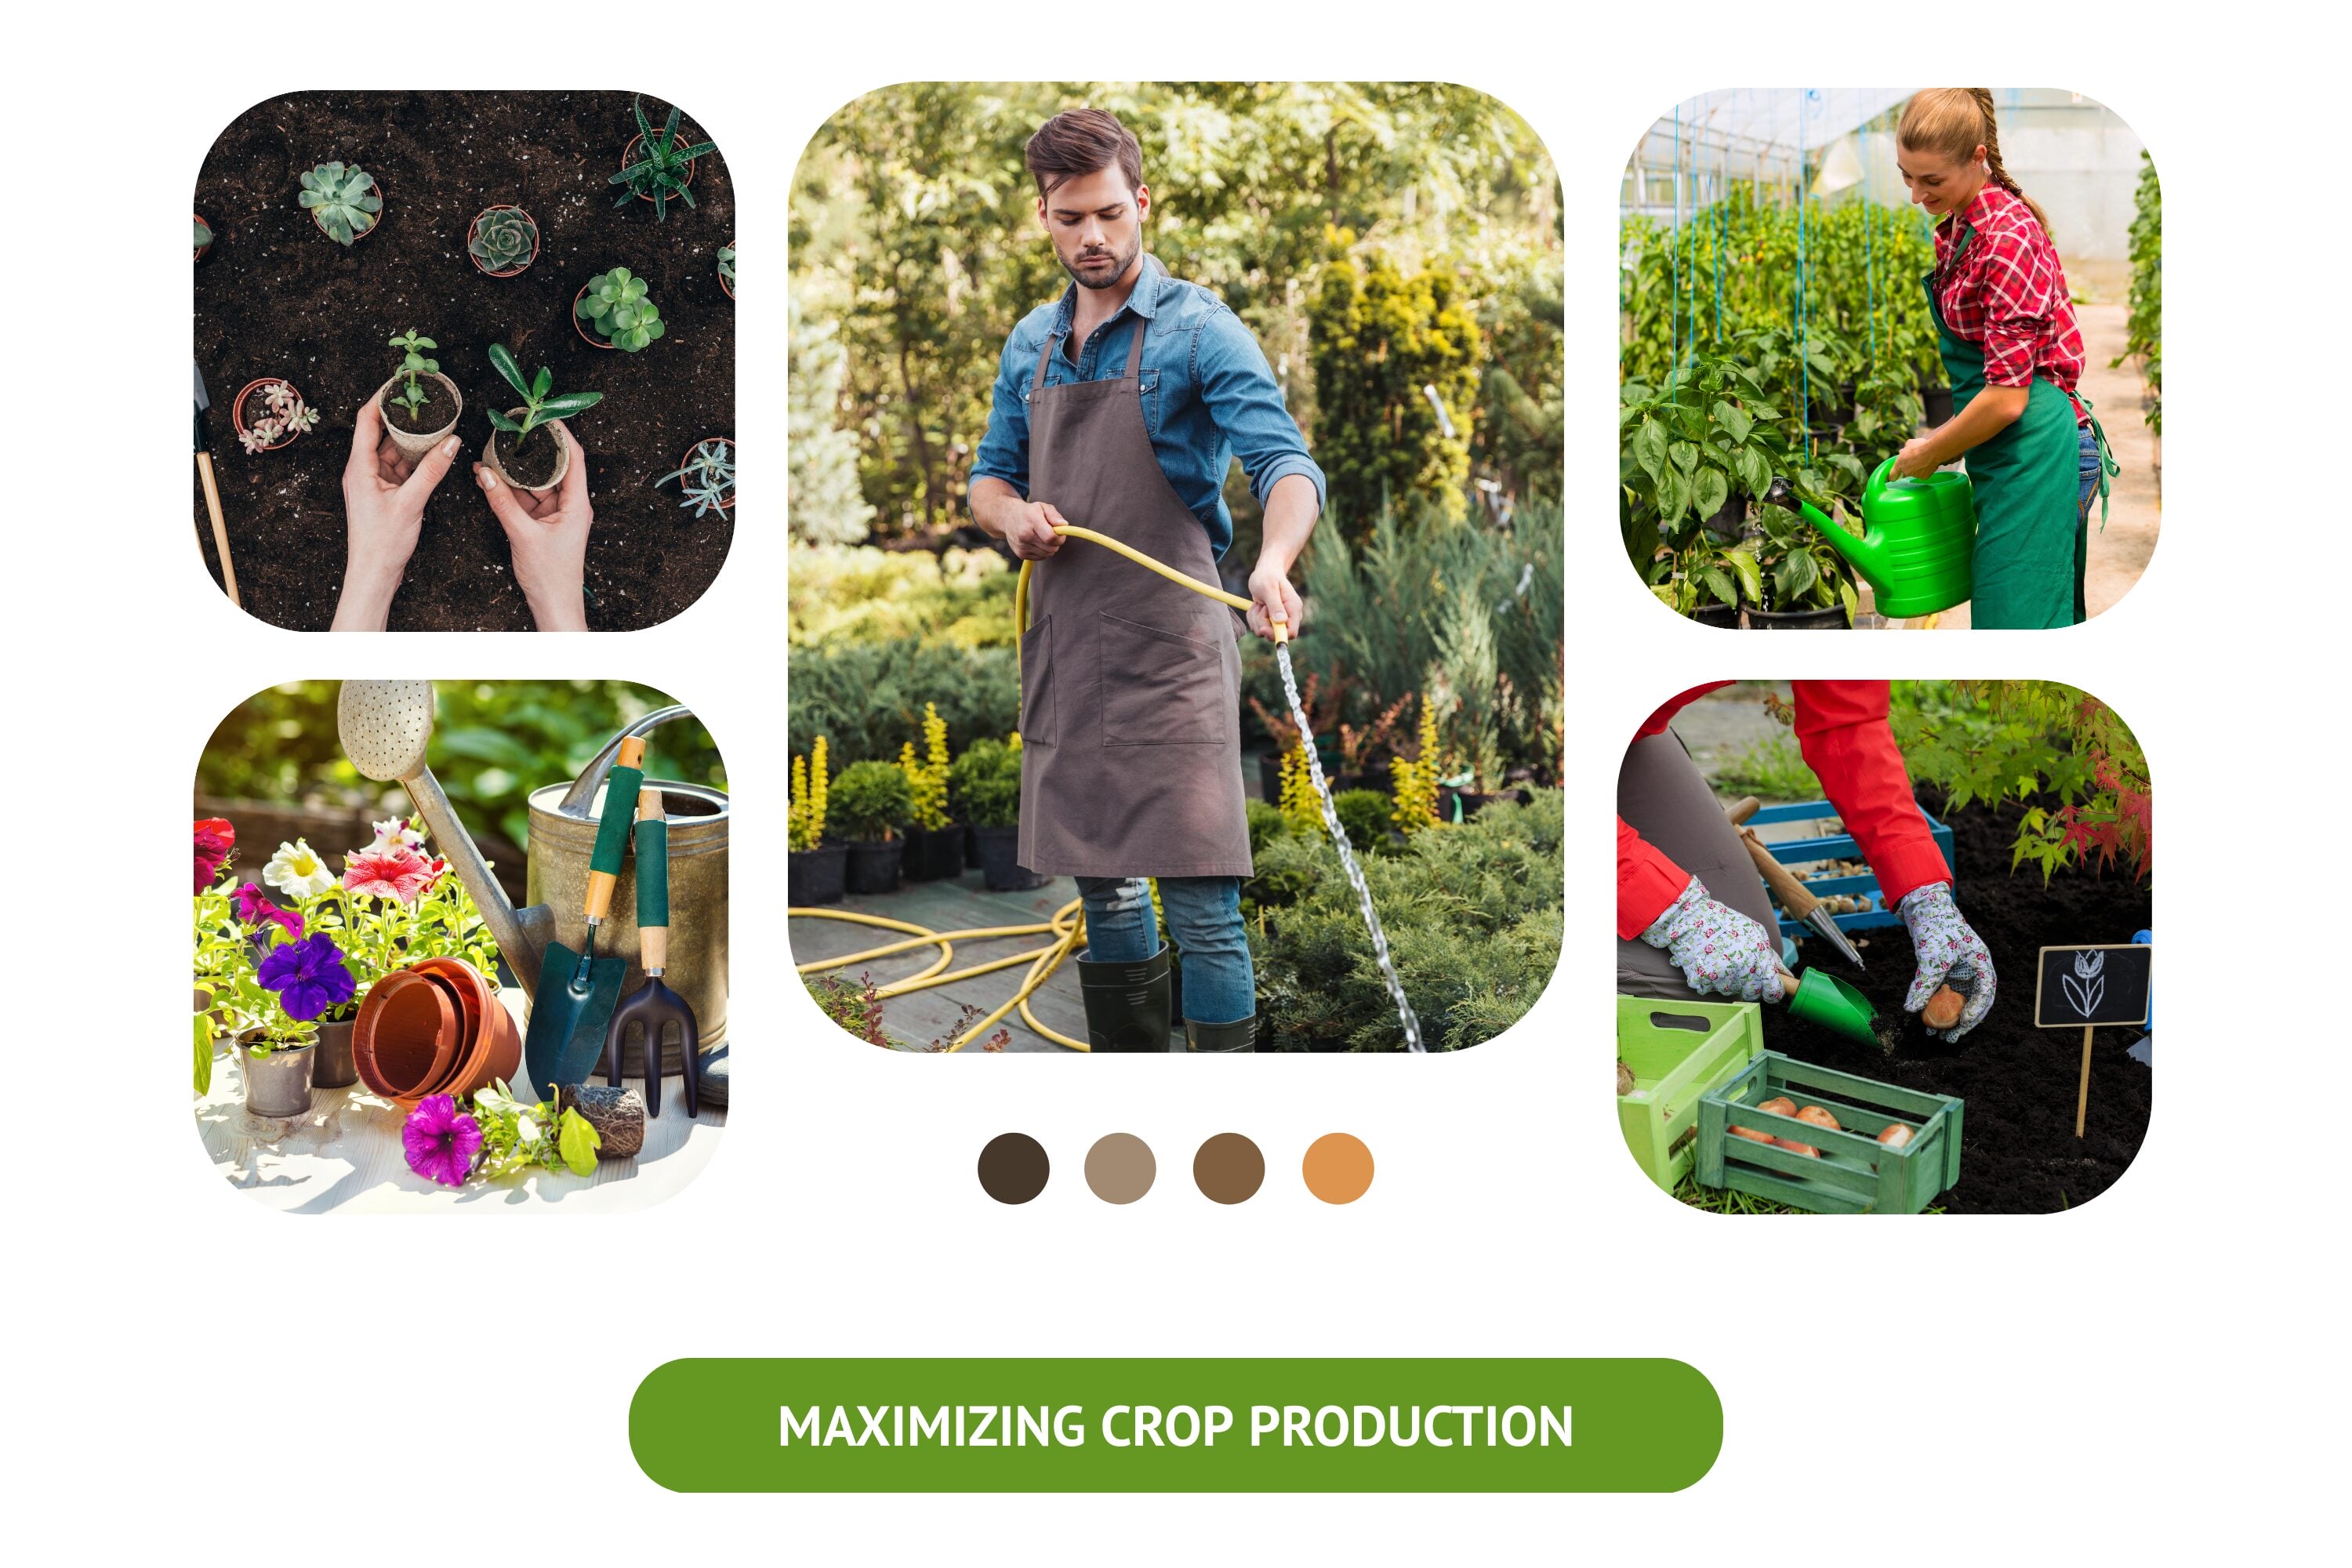 How to Maximize Crop Production?